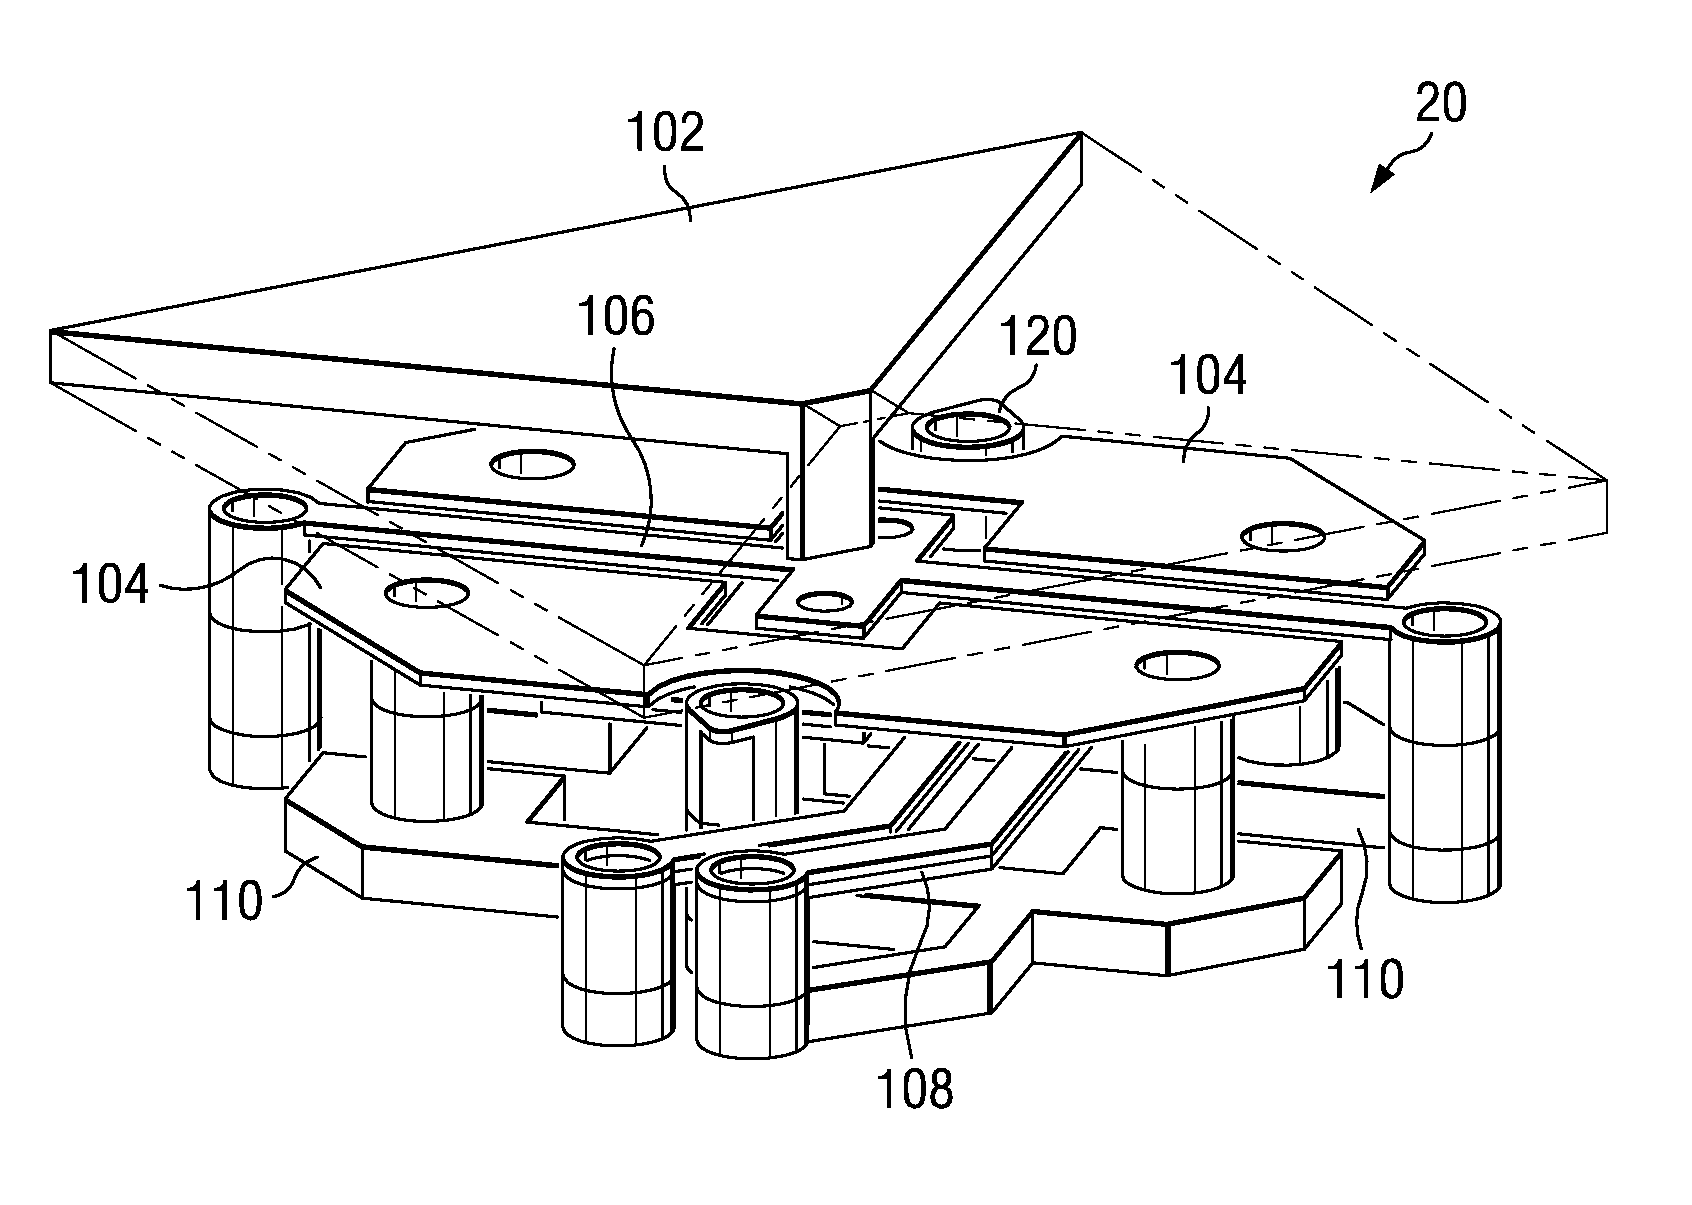 Micromirror system with electrothermal actuator mechanism